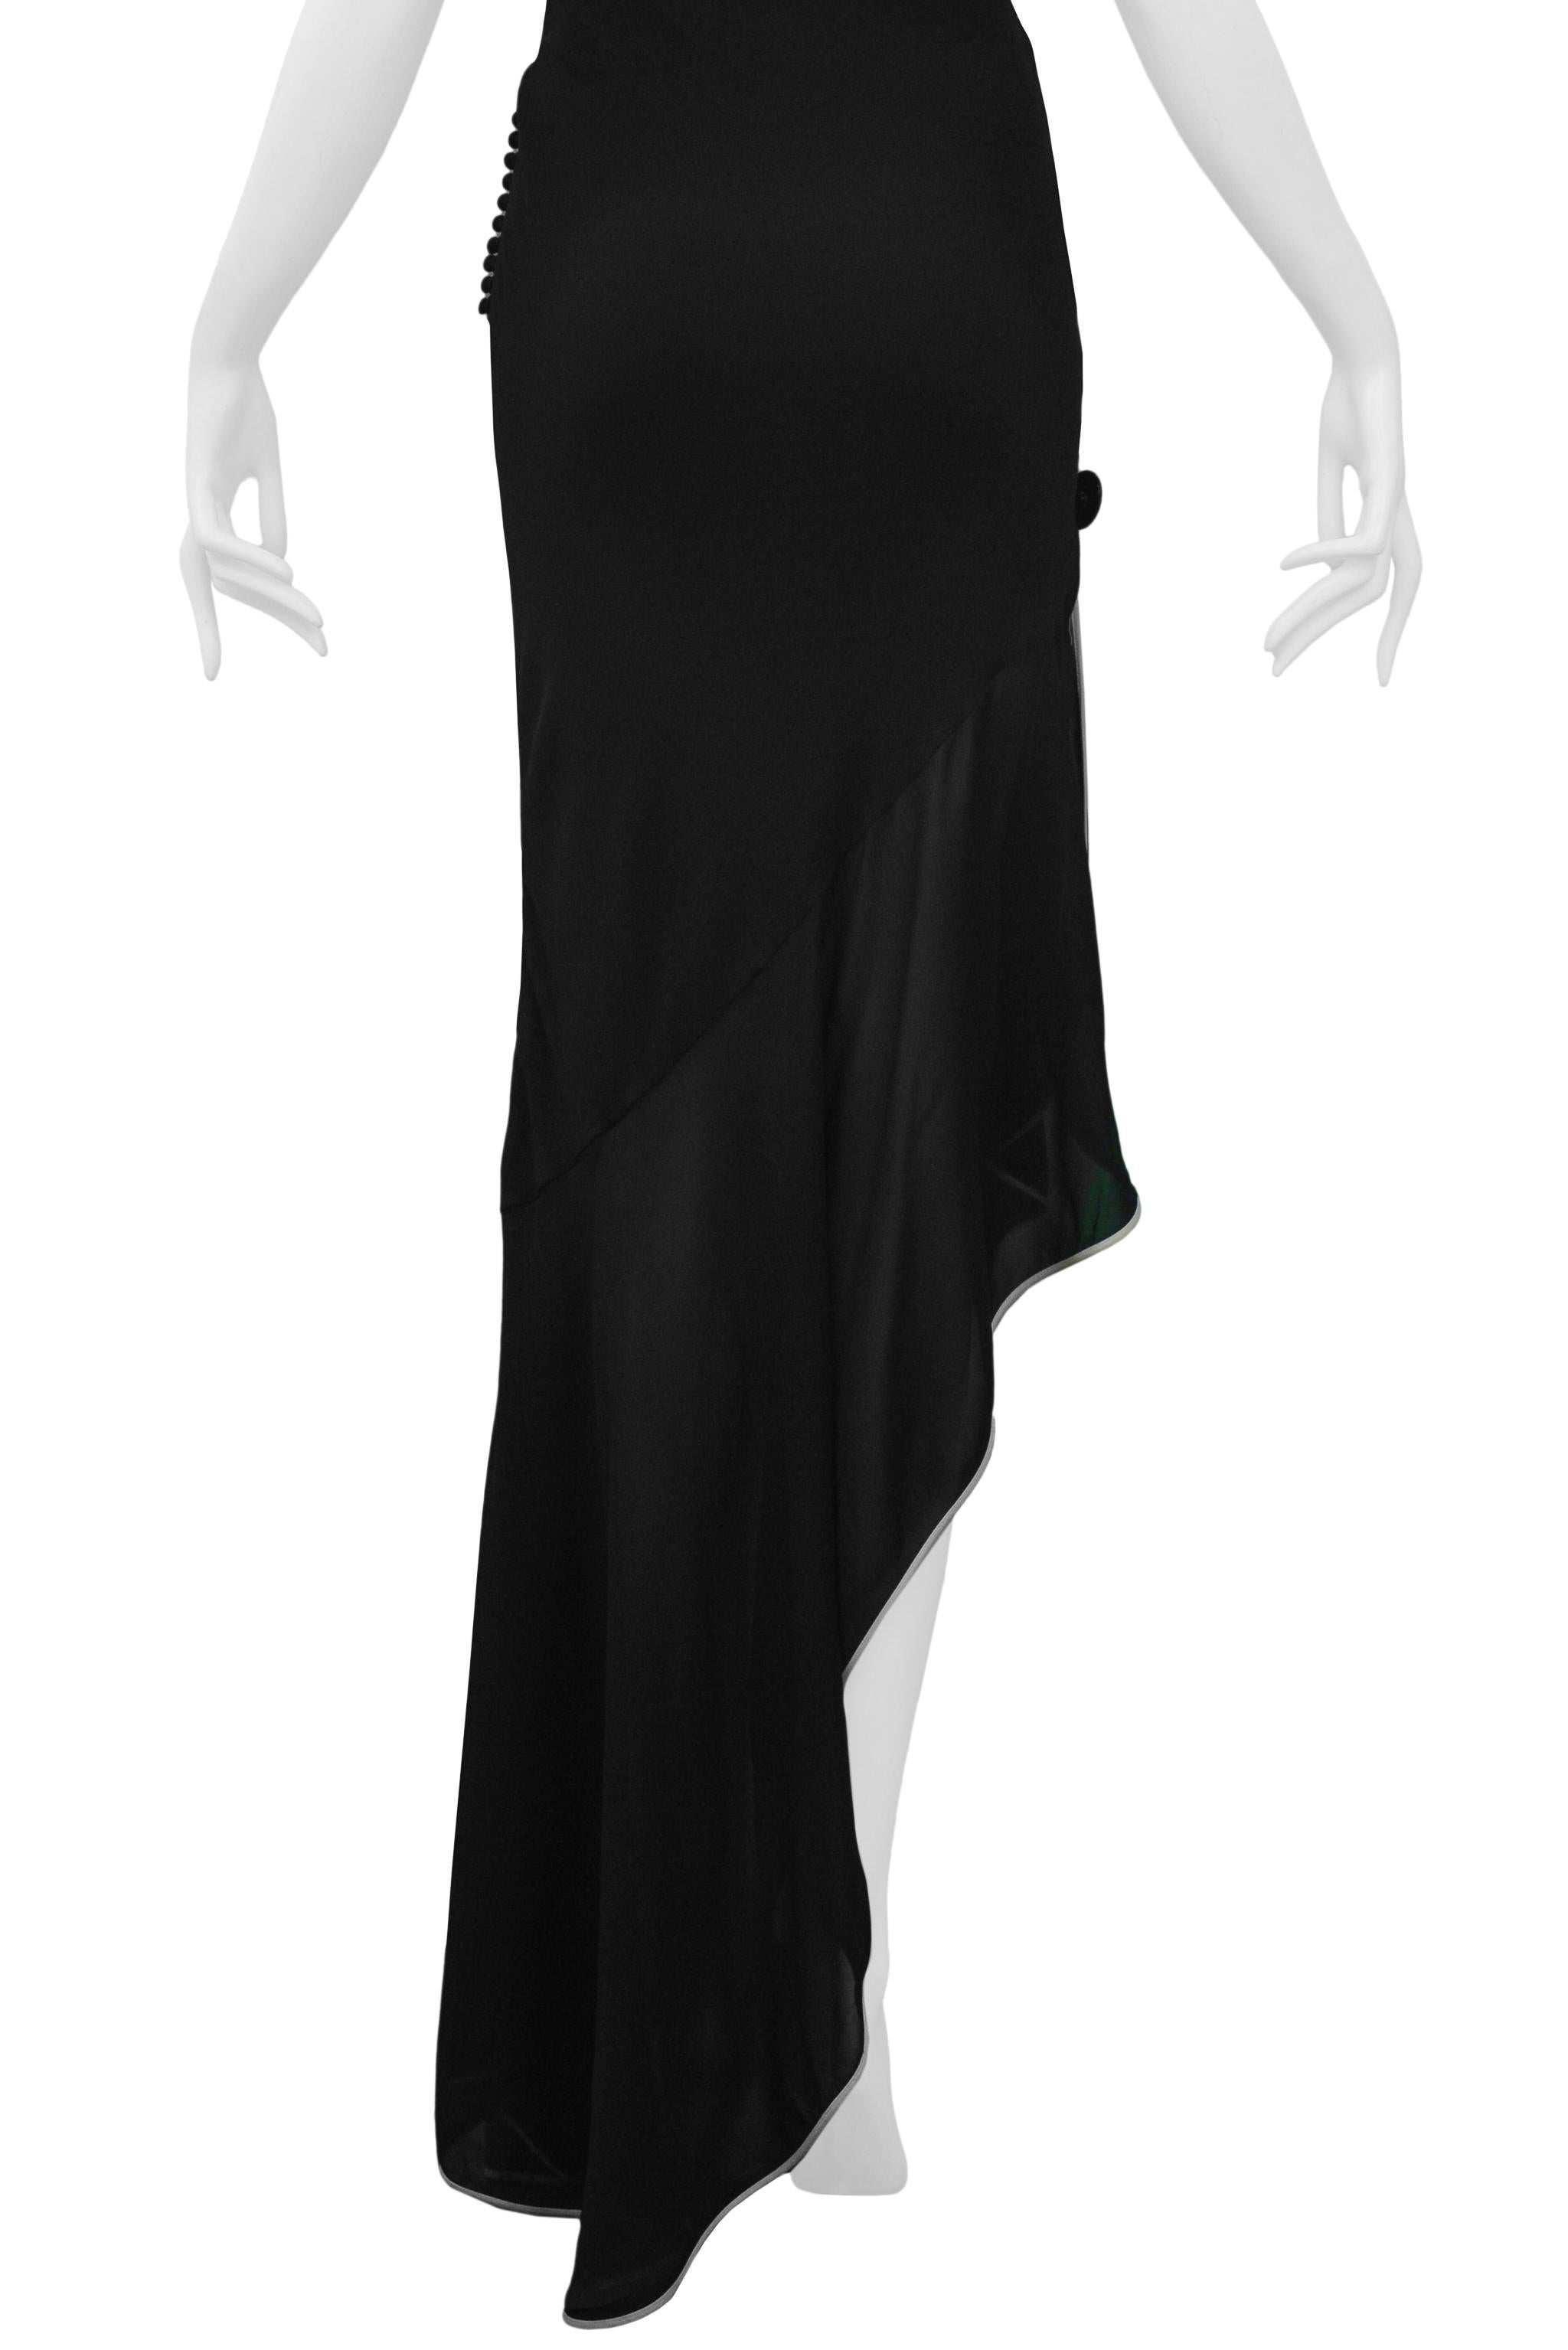 Christian Dior Black Maxi Evening Dress With White Trim And Bow 2